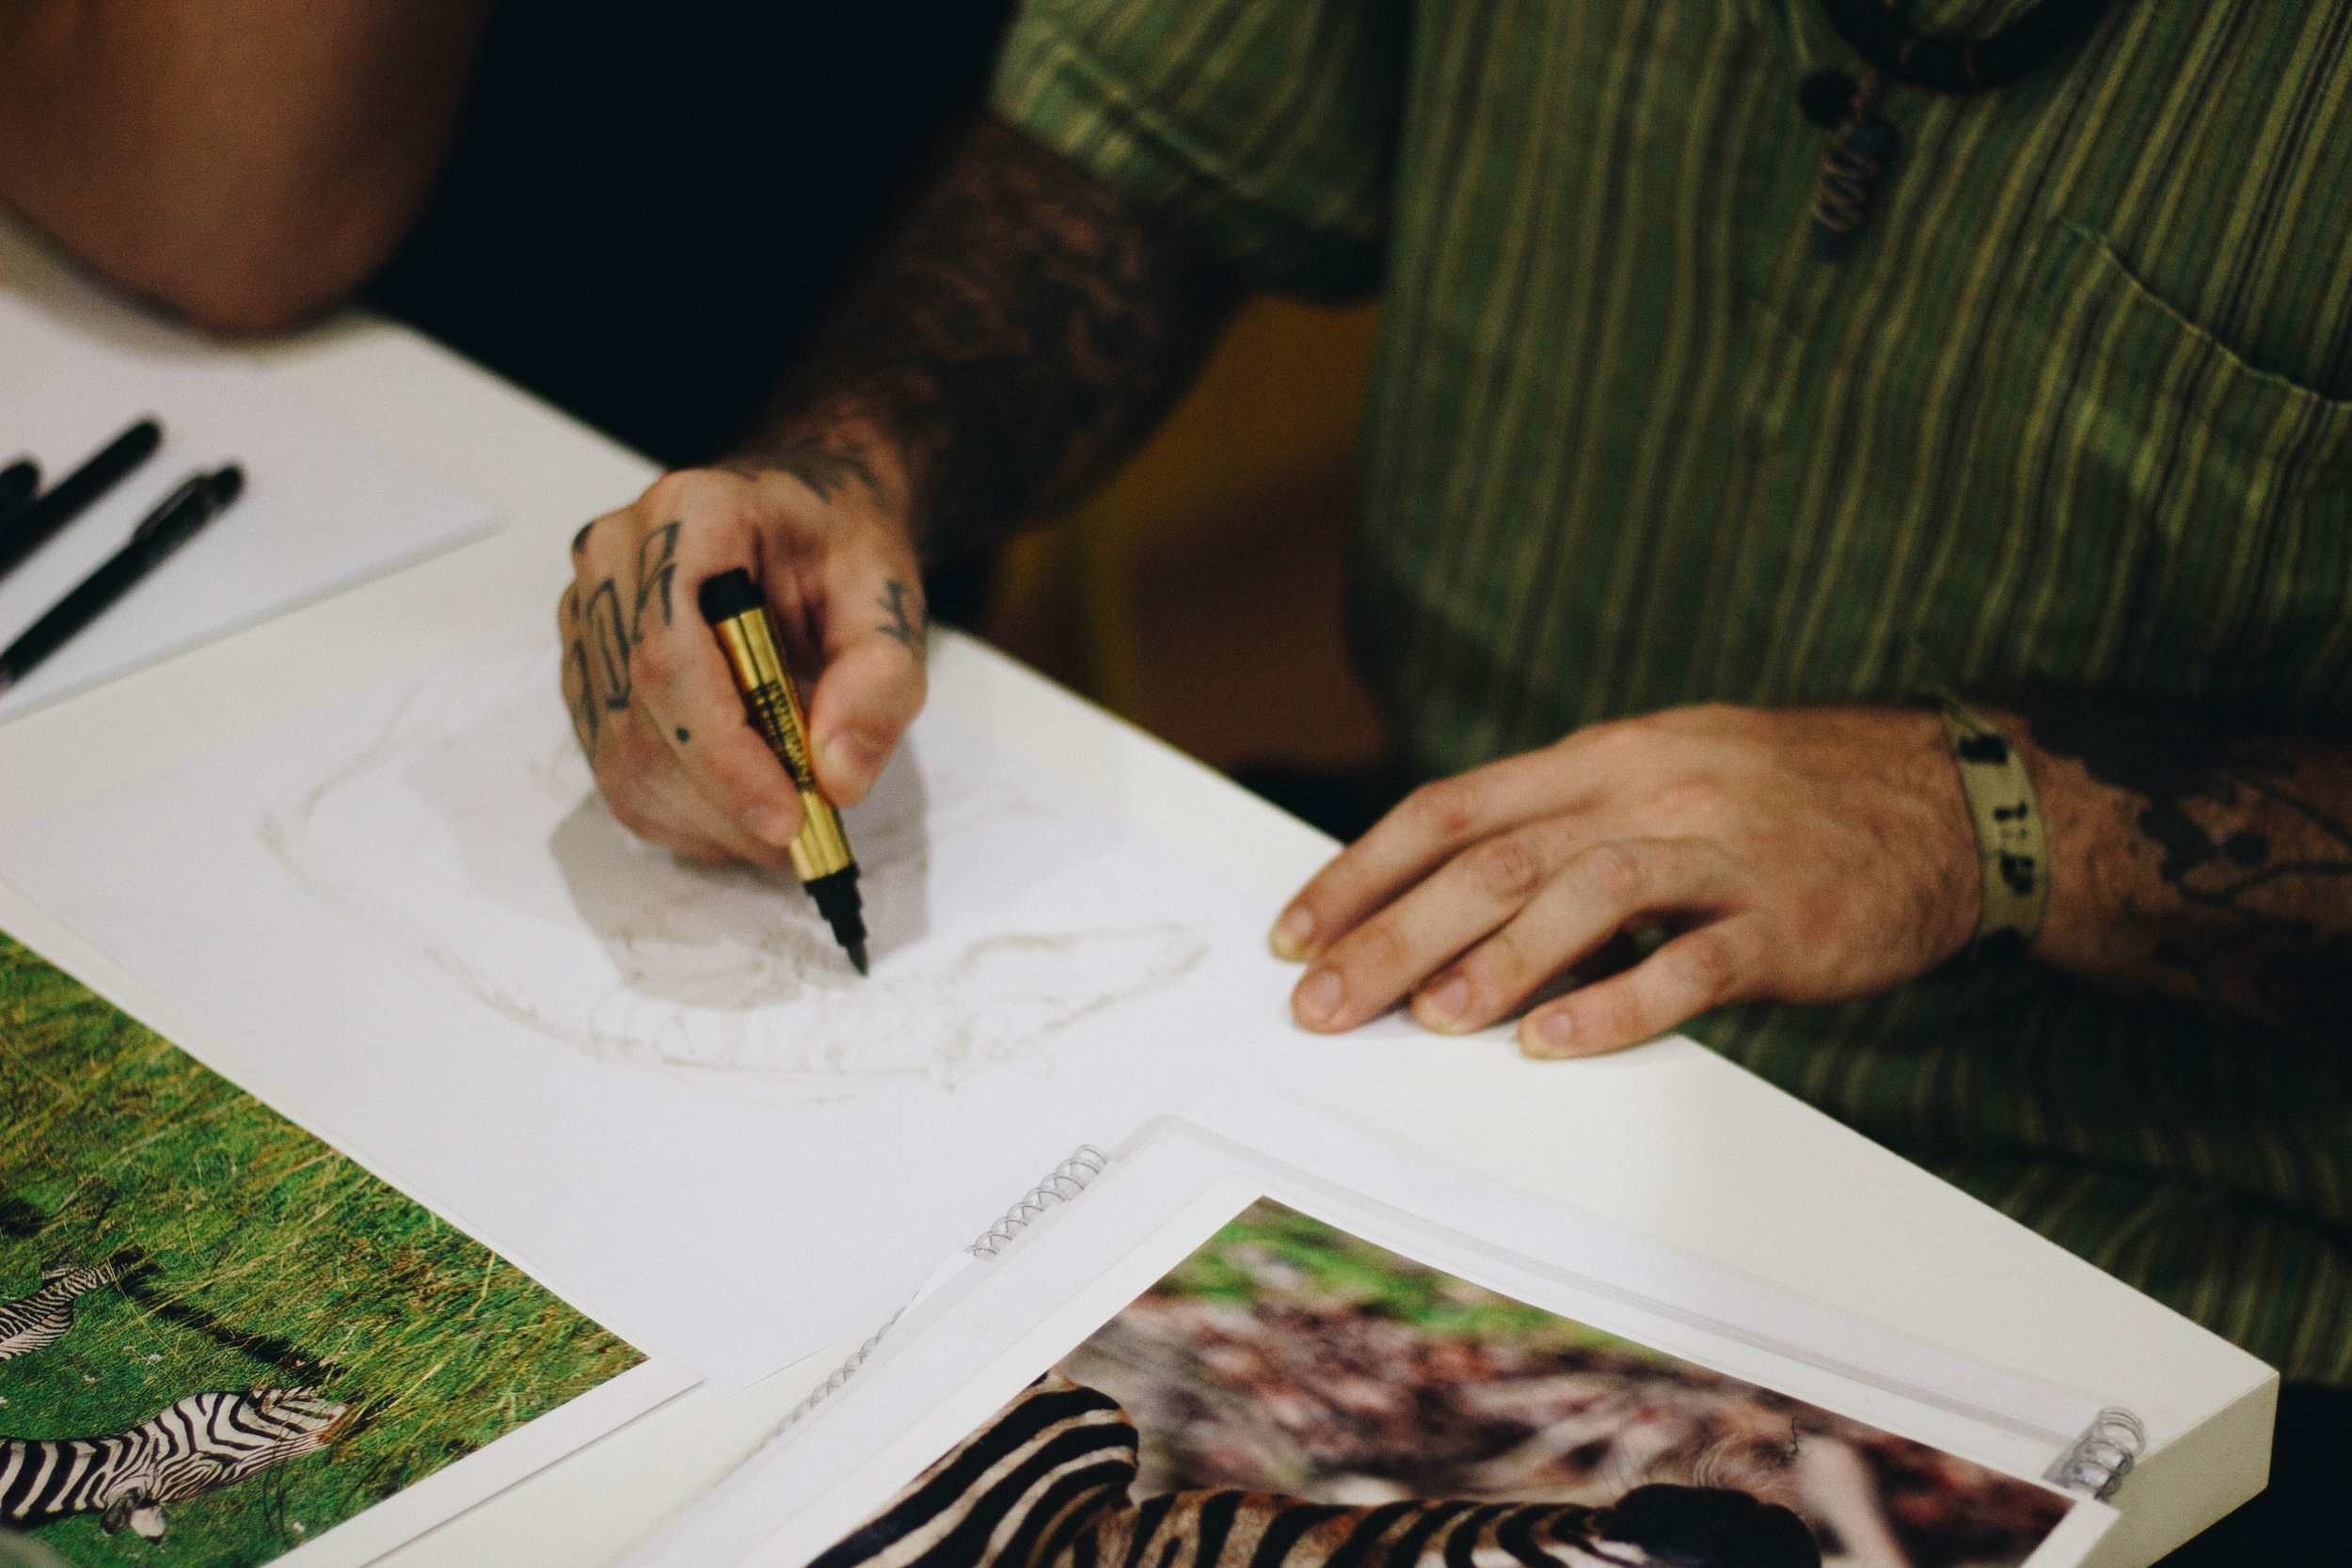 A person sitting at a table and sketching, with photos of zebras on the table. (photo © Thiago Barletta via Unsplash)